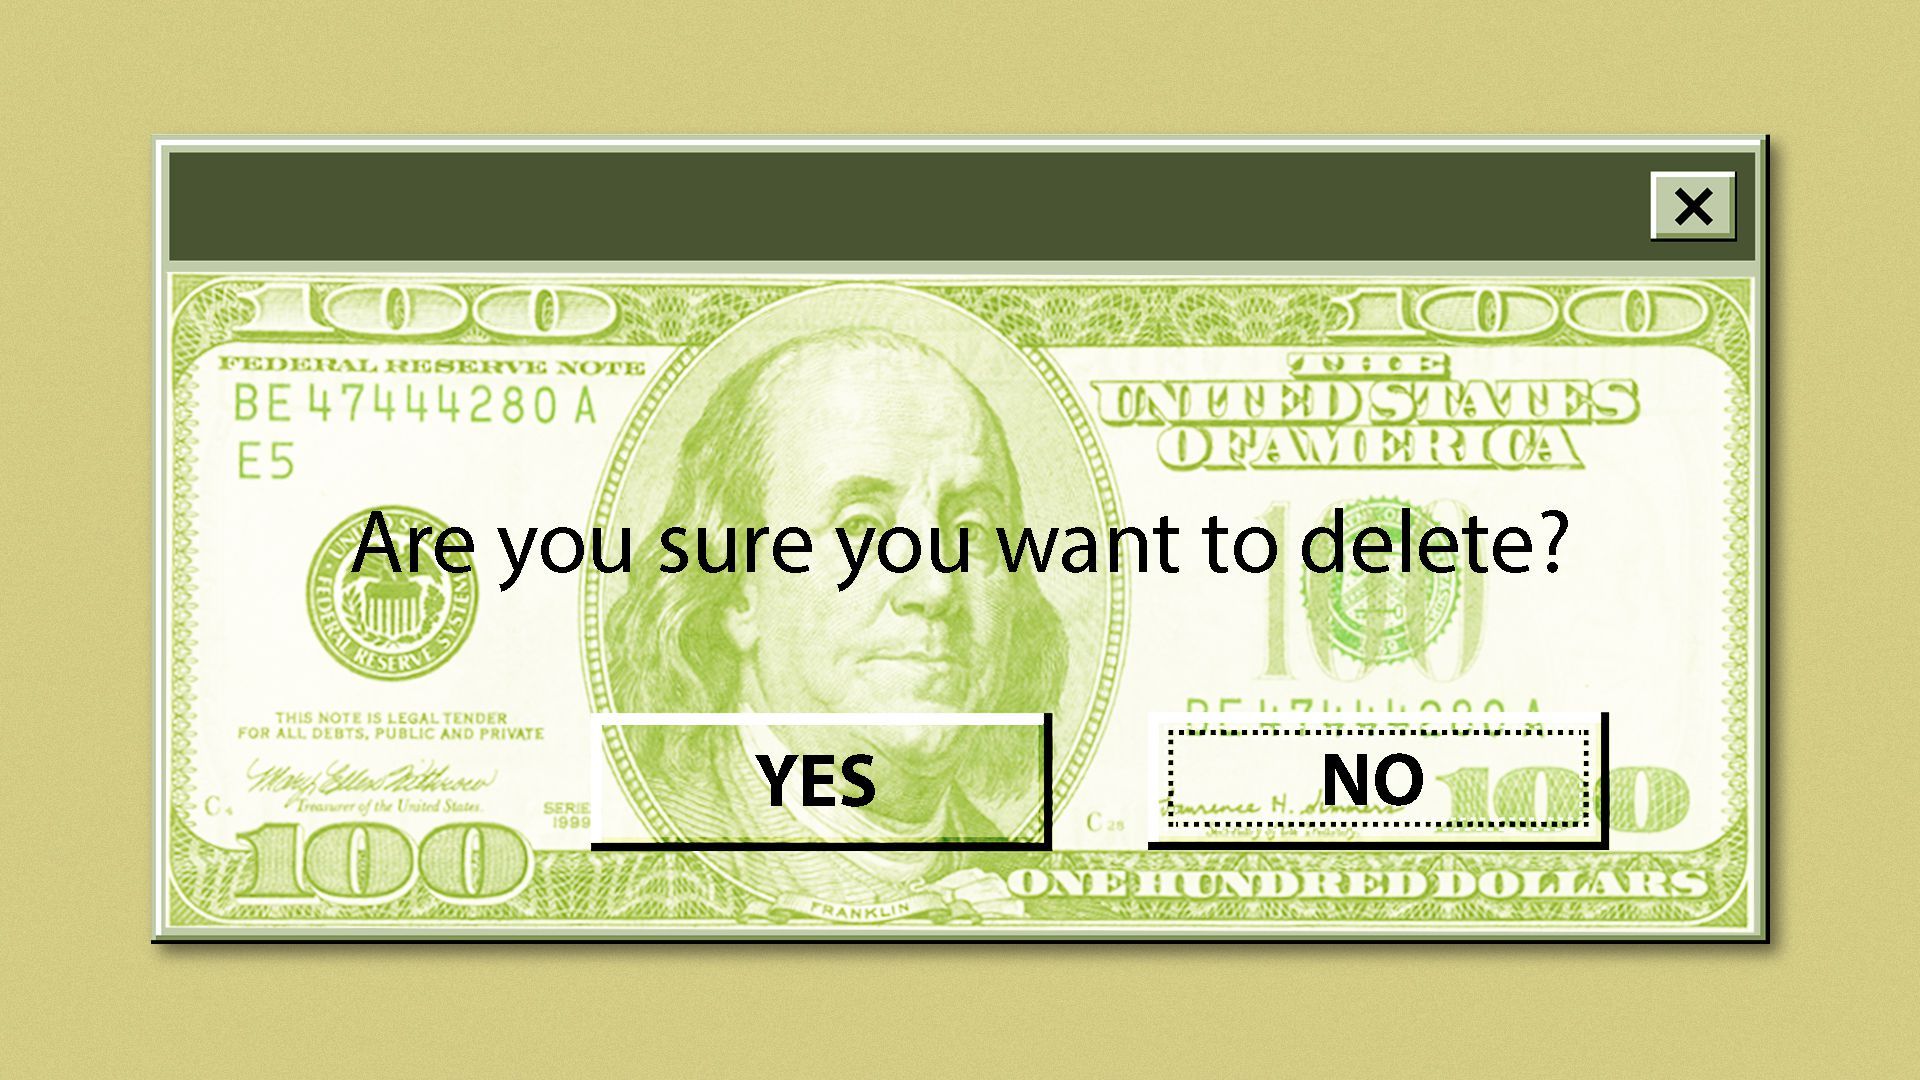 Illustration of a one hundred dollar bill as a computer dialogue box, asking the user whether they want to delete